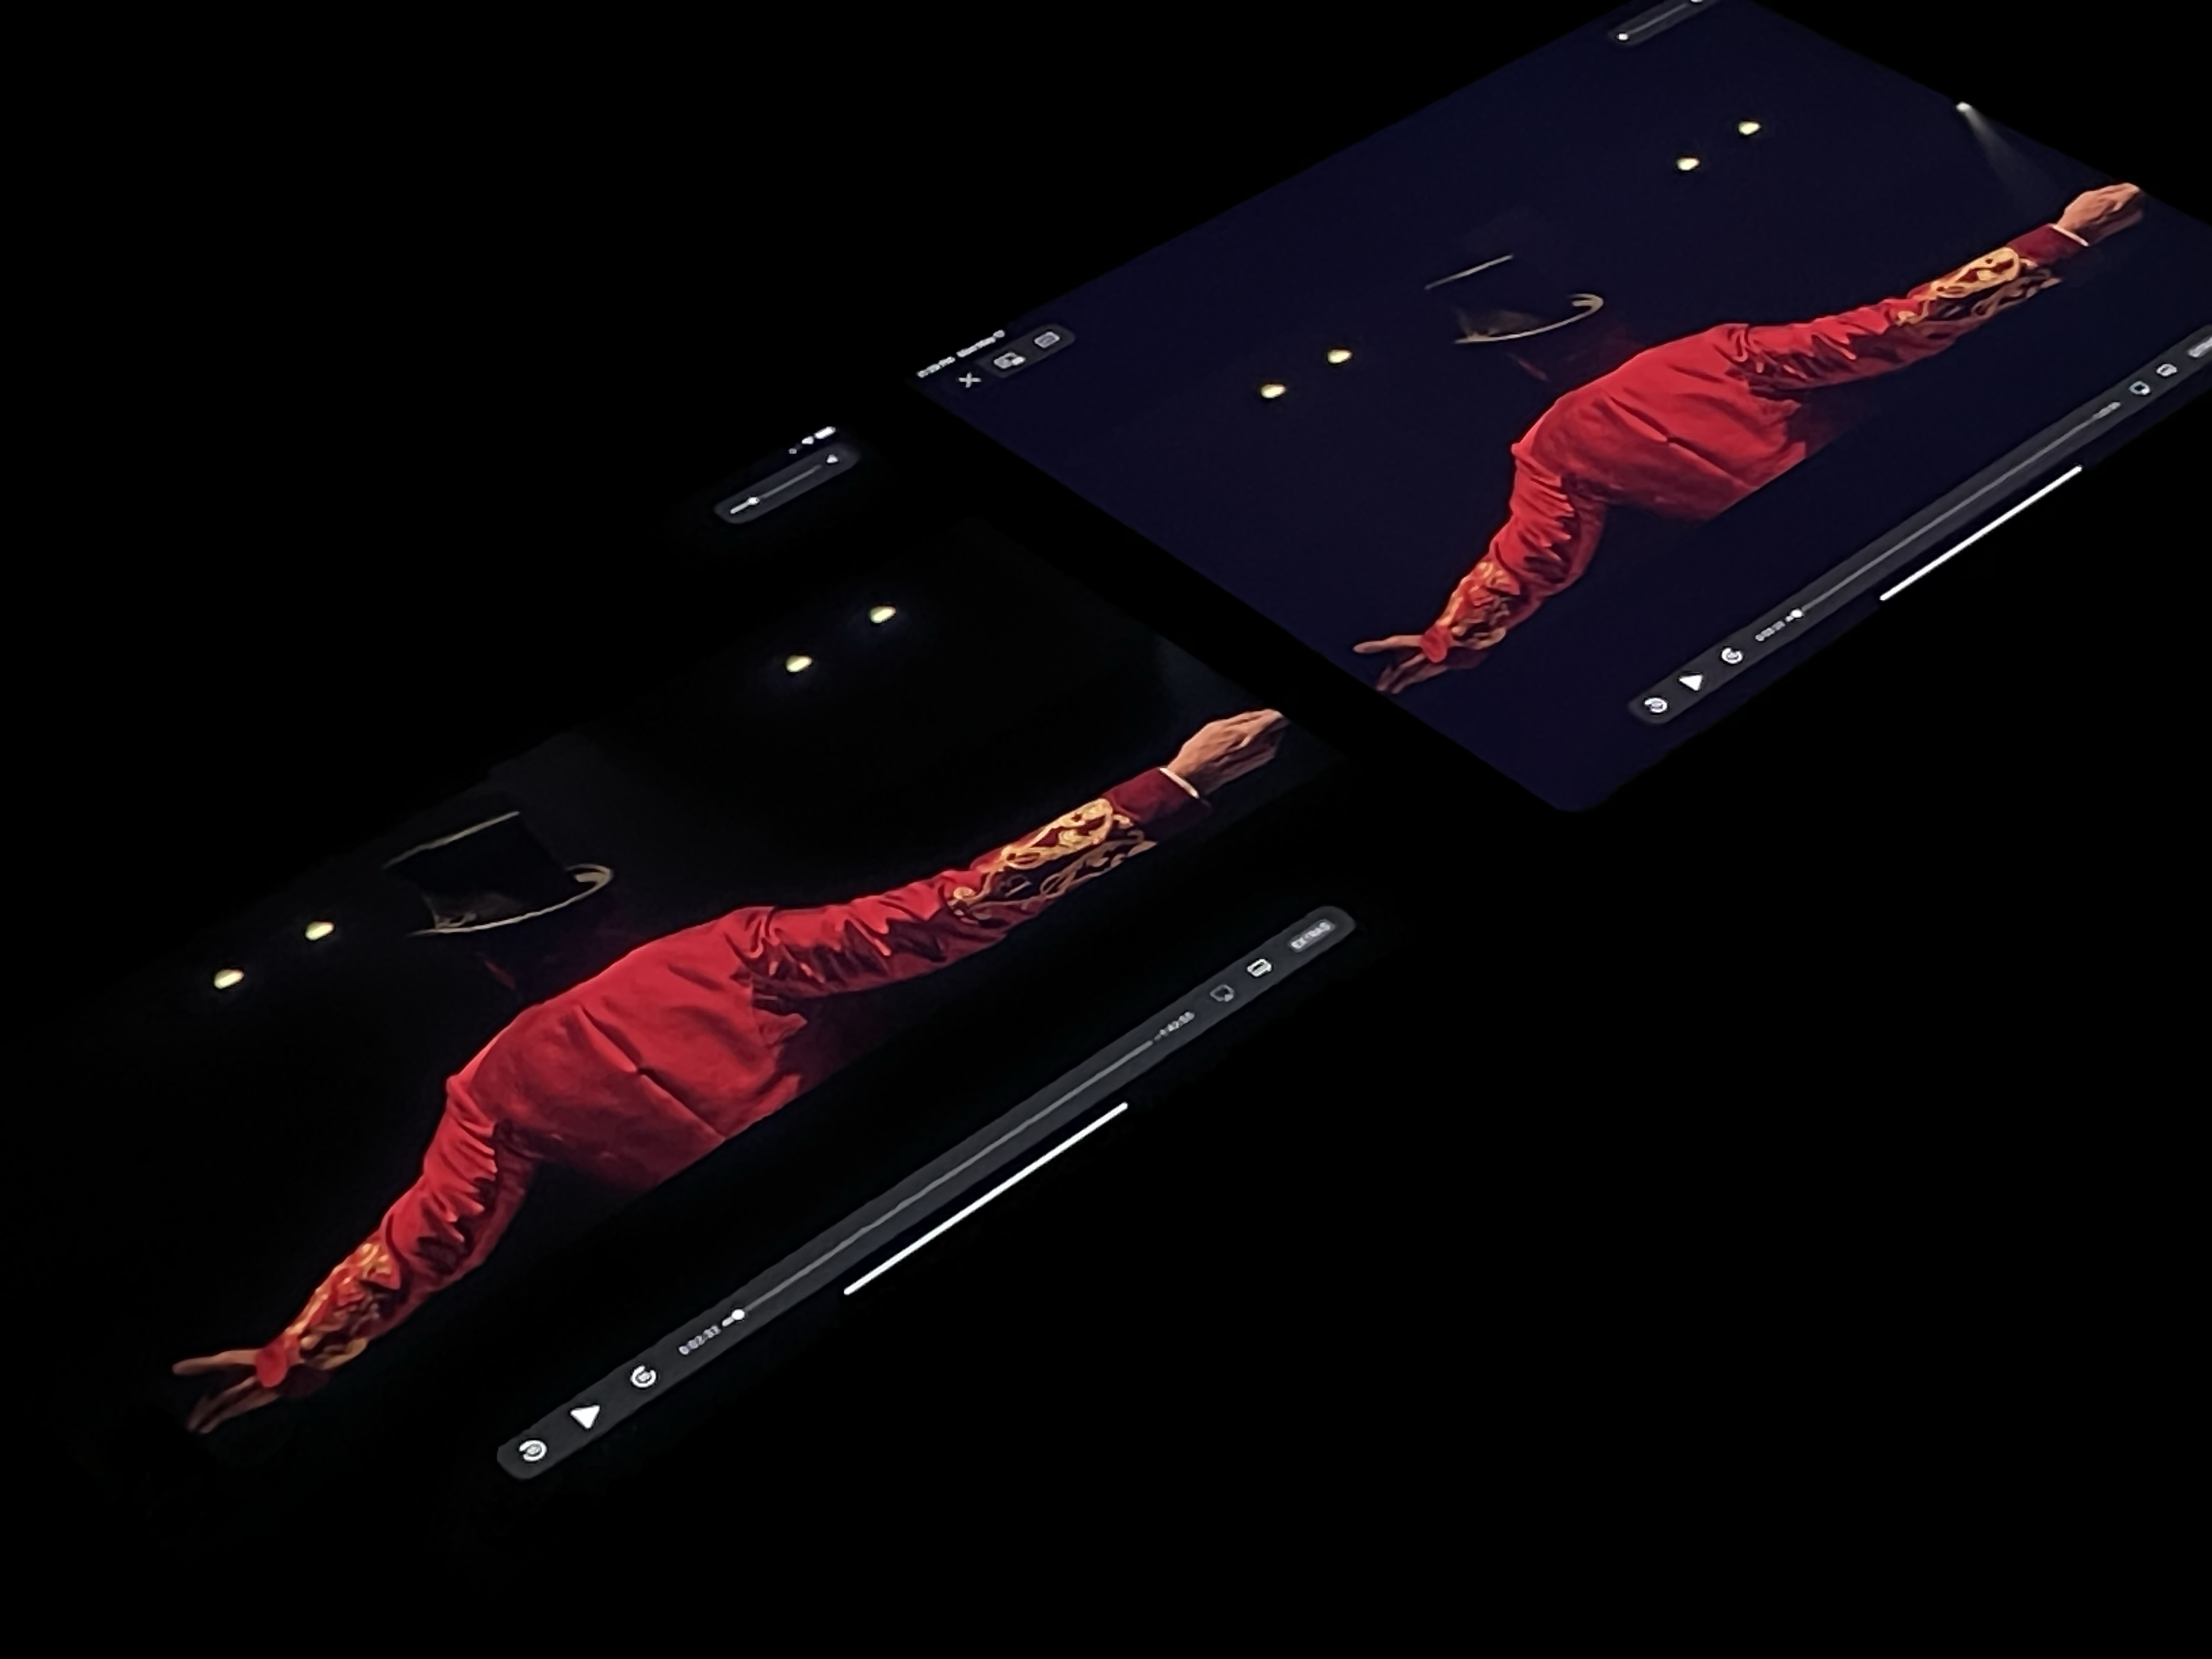 The new iPad Pro (left) features more accurate colors and near-pure blacks. Colors on the 2020 iPad Pro (right) look washed out in comparison.